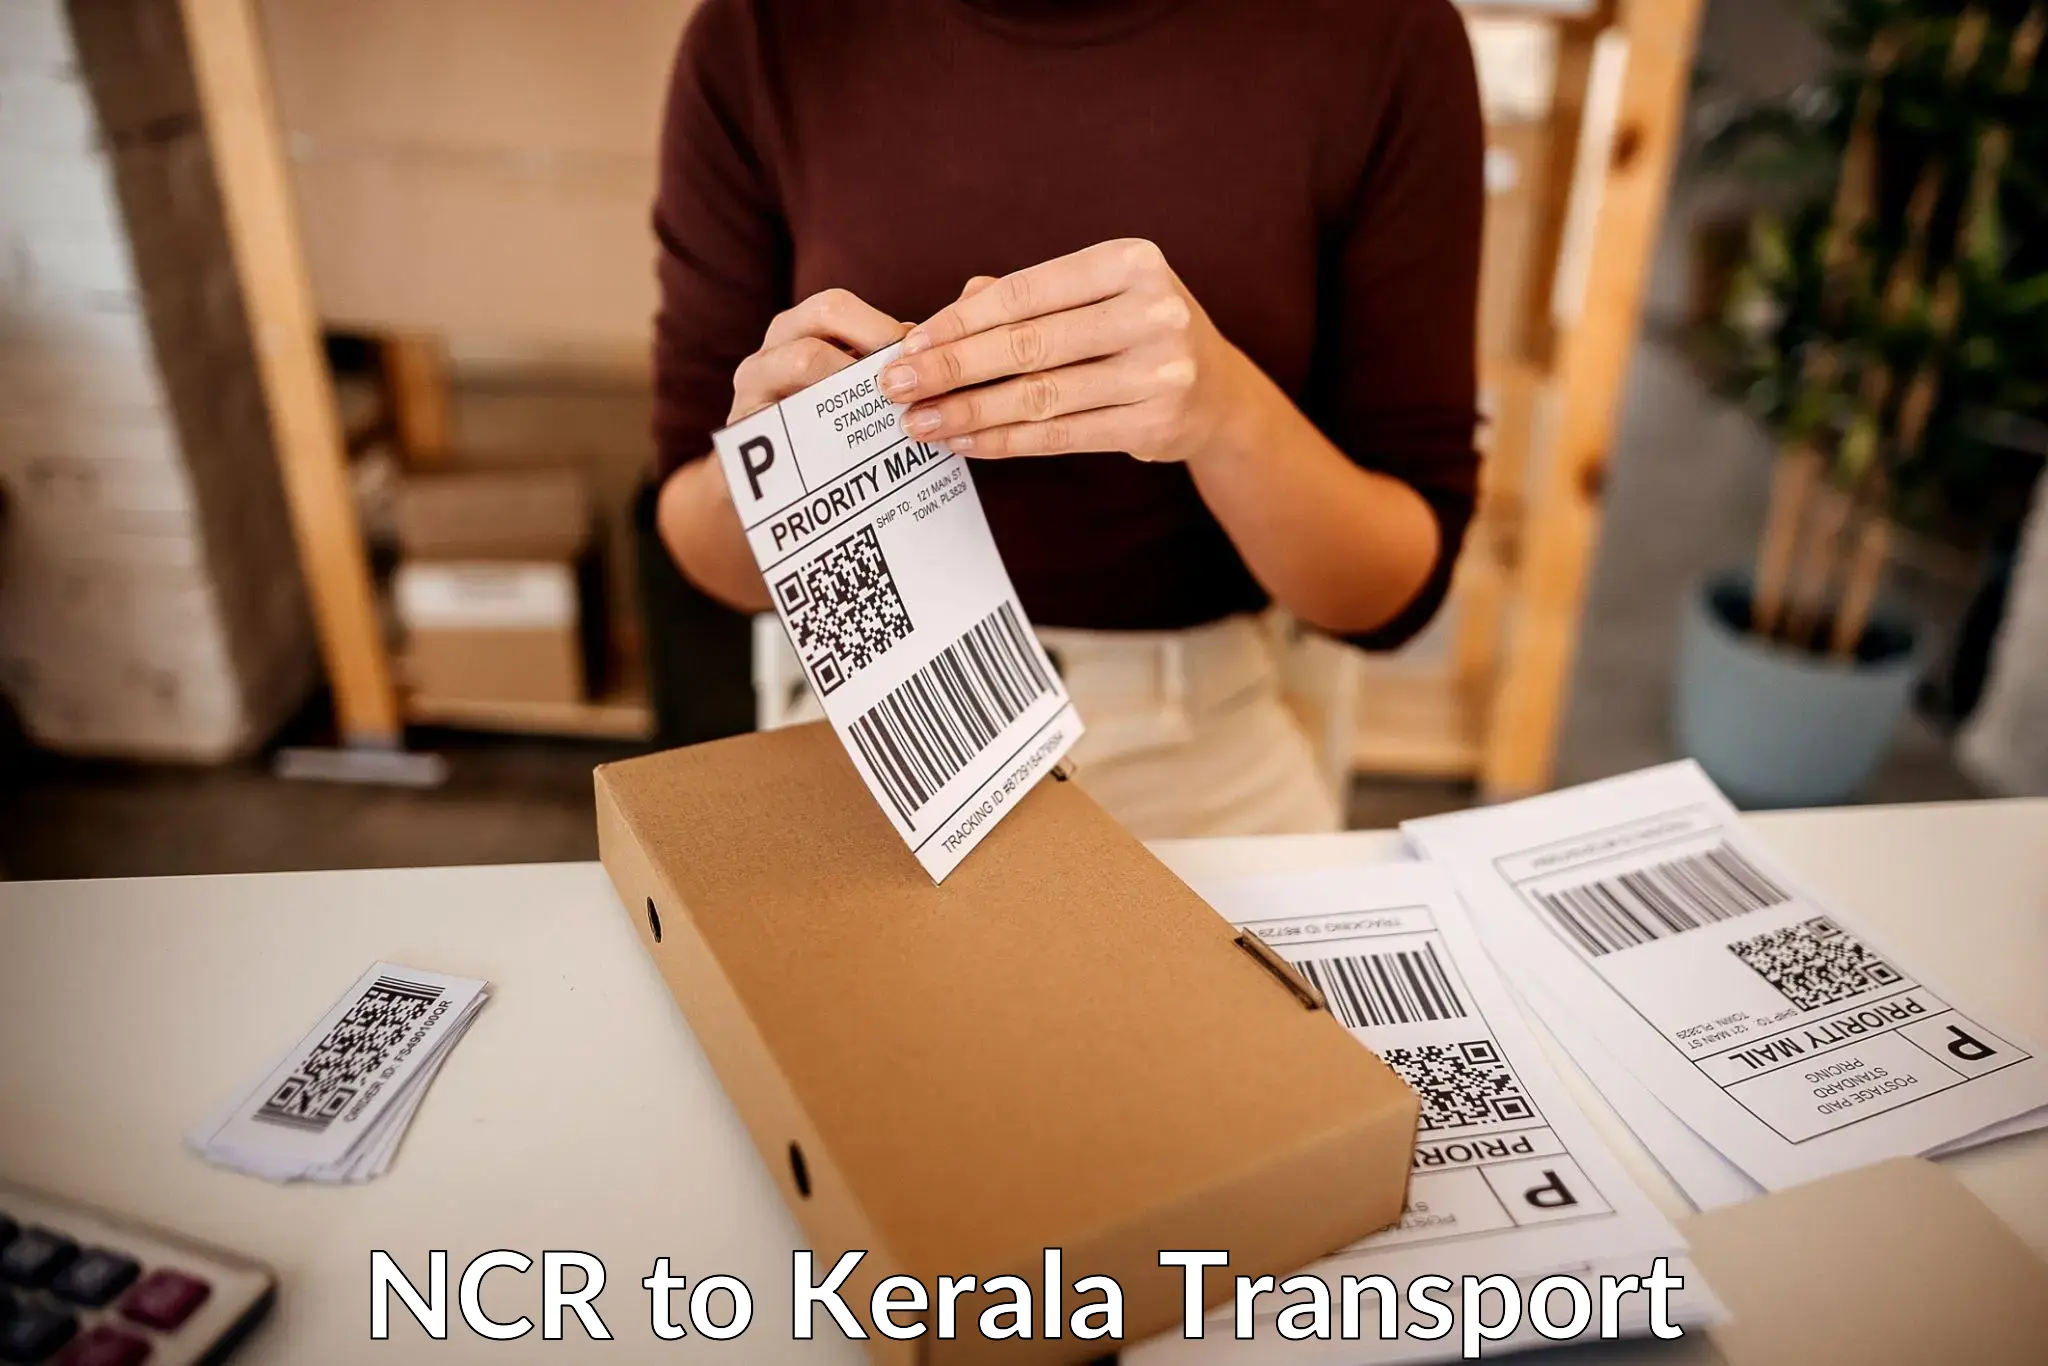 Interstate transport services NCR to Kollam